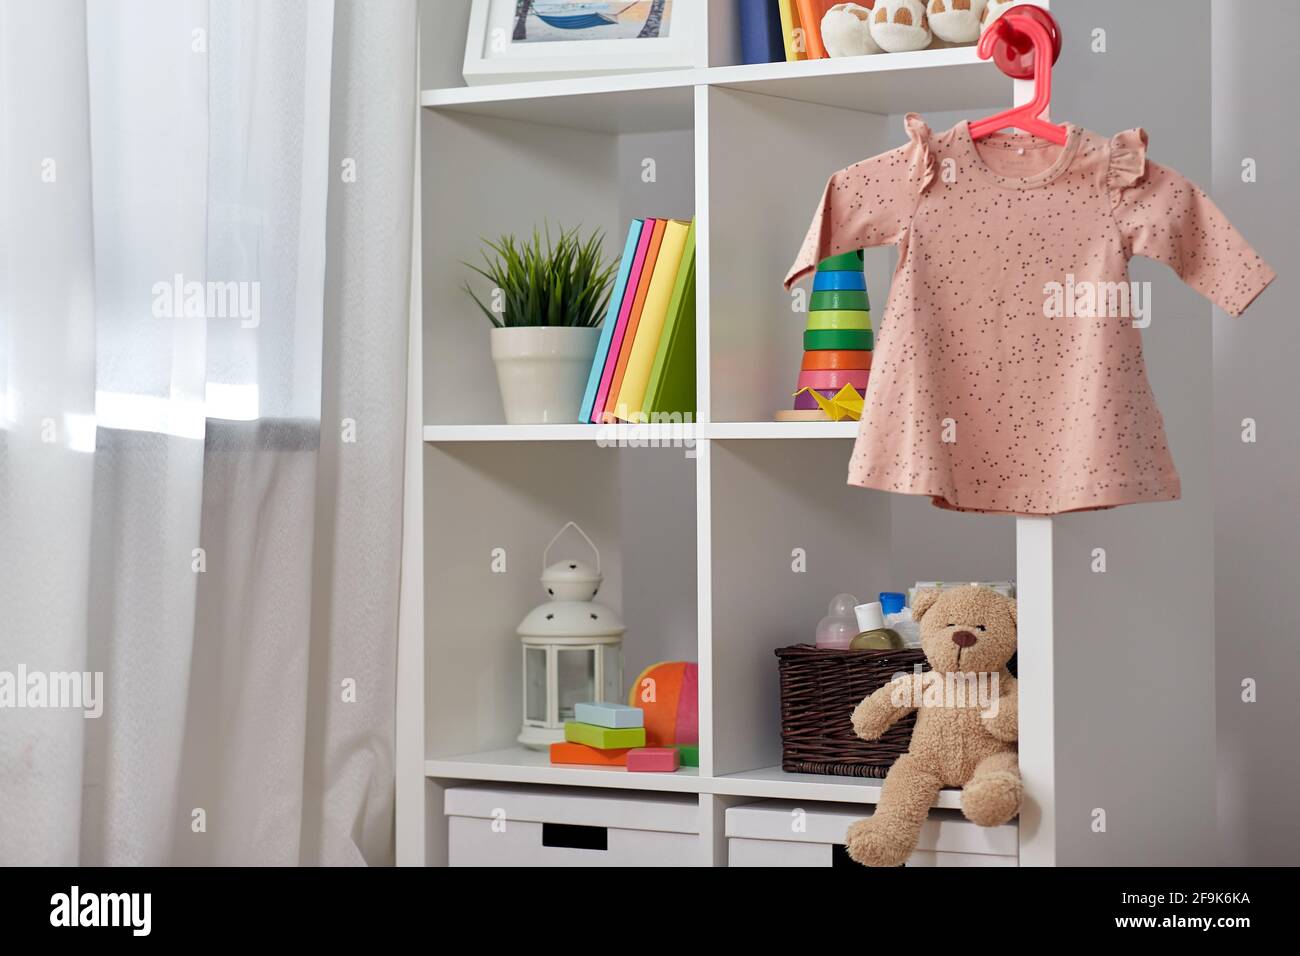 kid's room interior with bookcase and dress Stock Photo